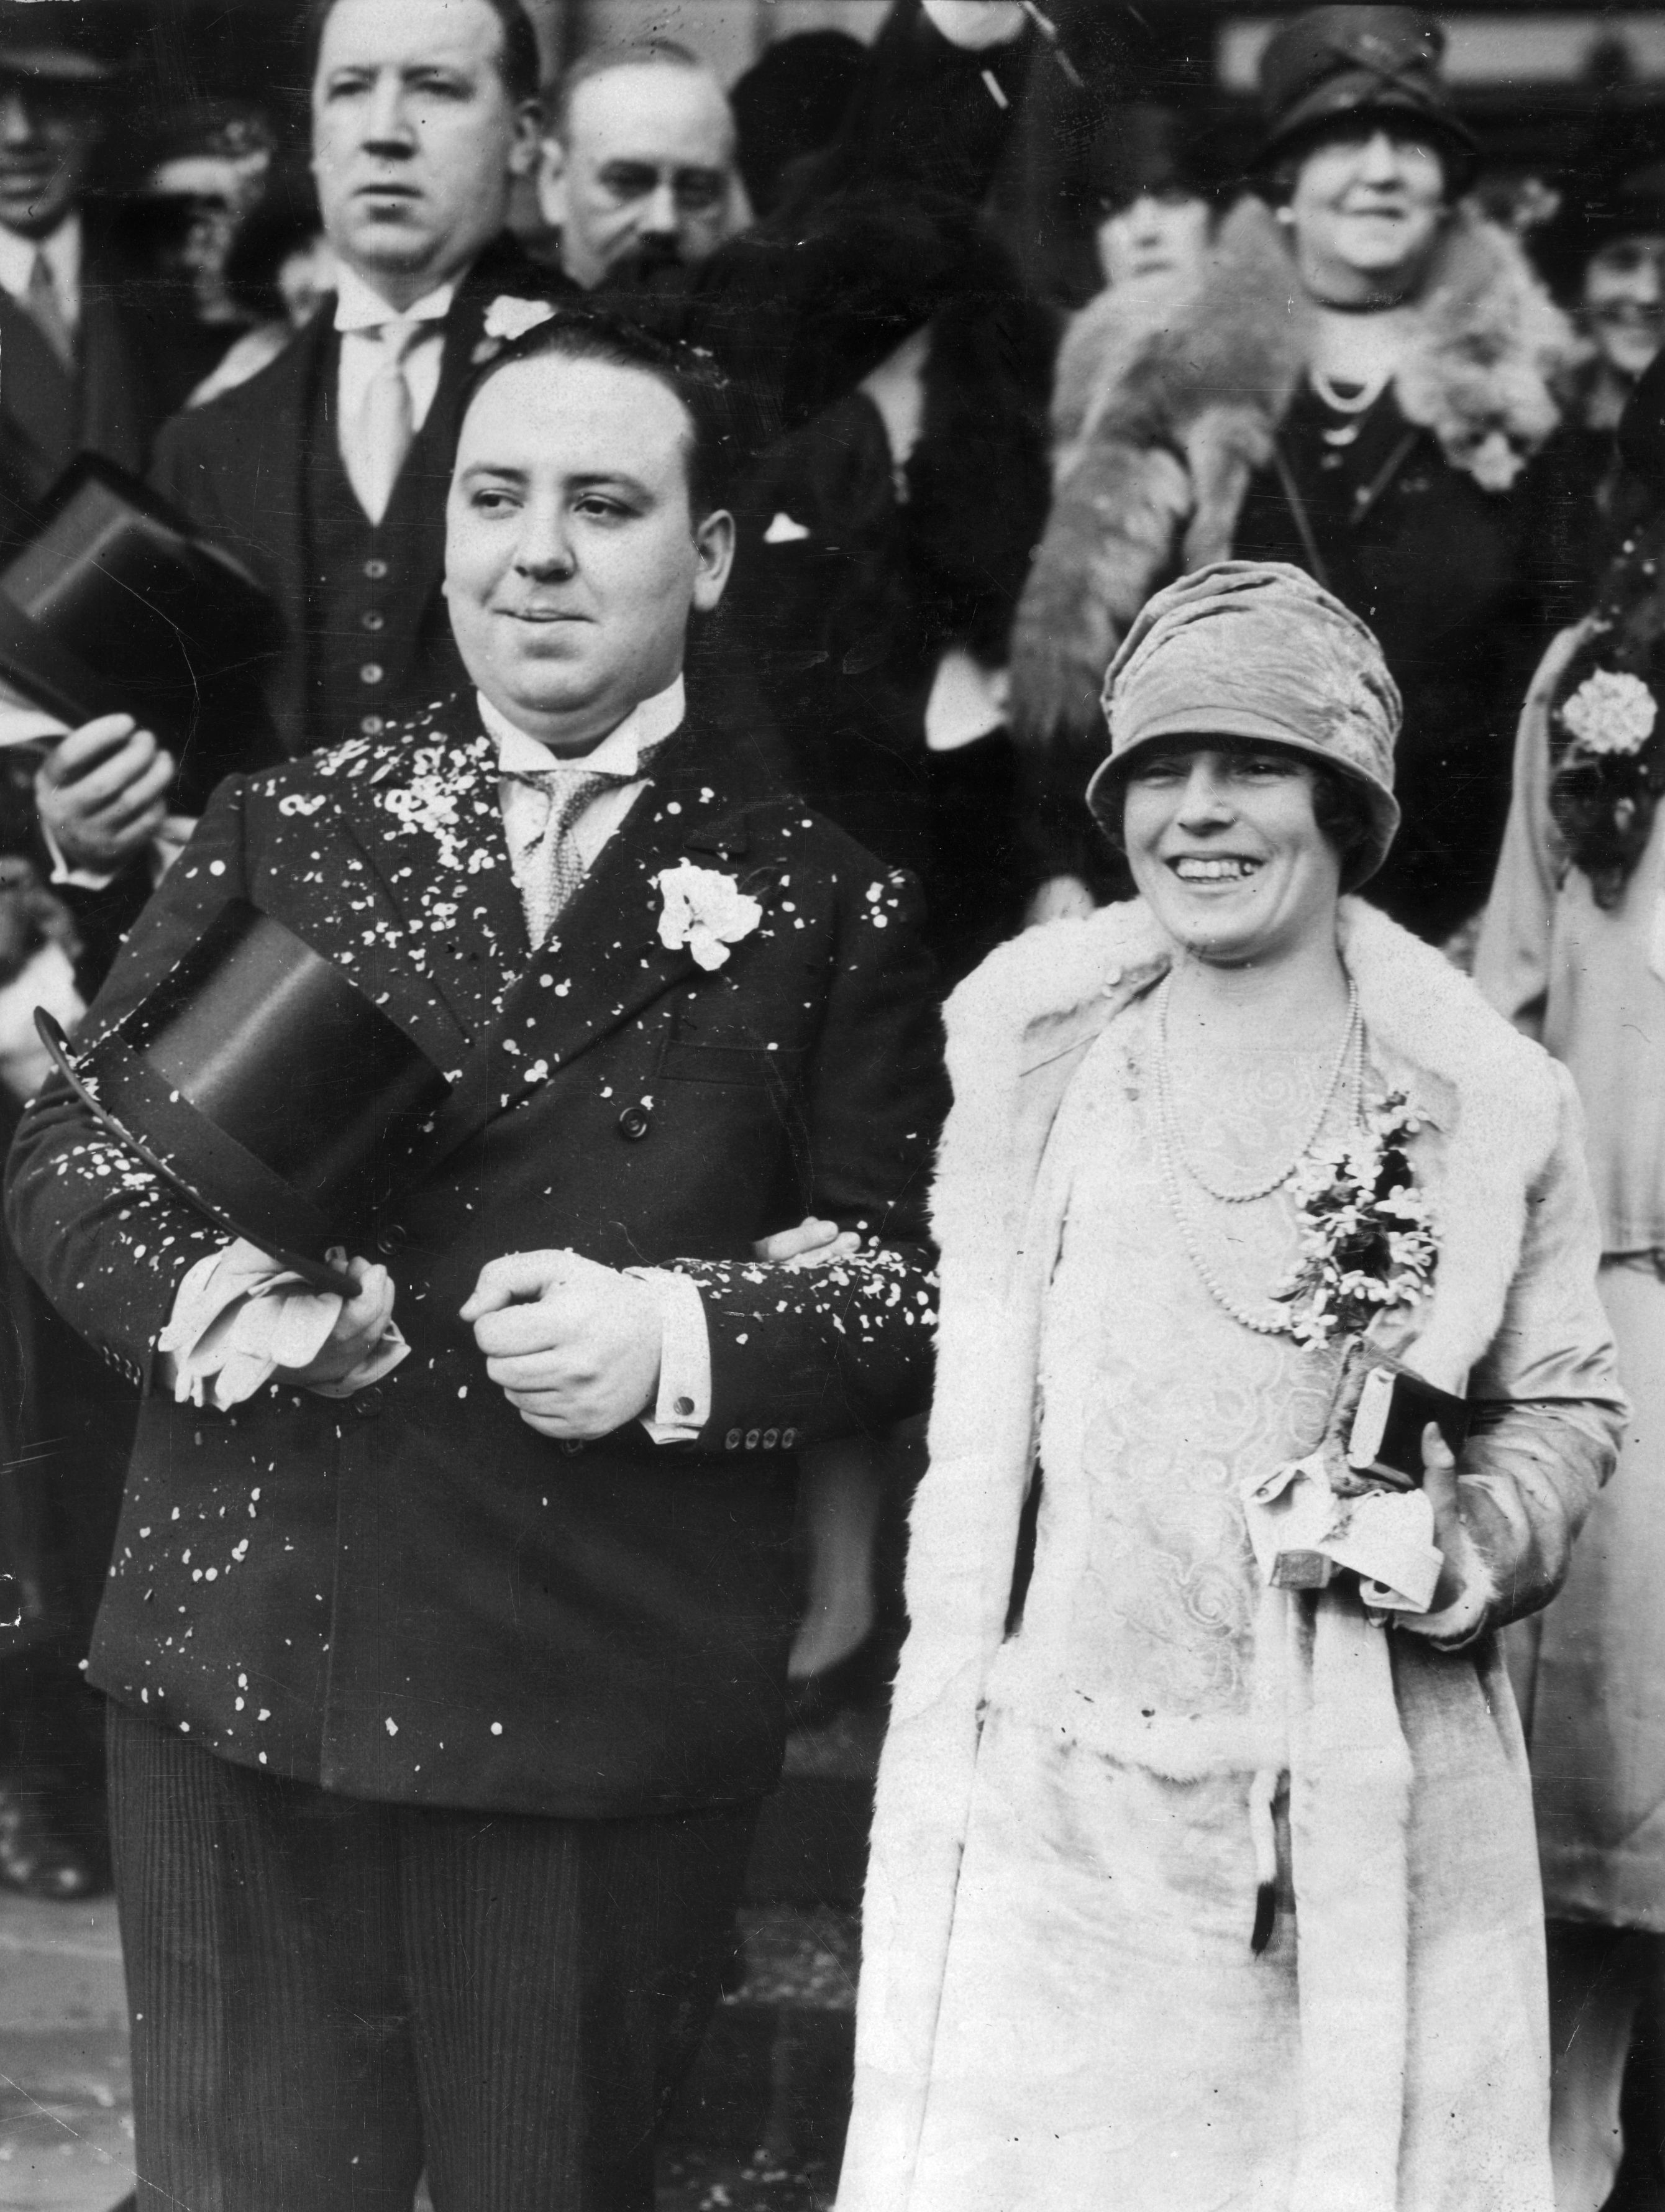 Alfred and Alma on their wedding day, 2 December 1926. Alfred's older brother William is behind him, and his mother, Emma Jane, is likely behind Alma.